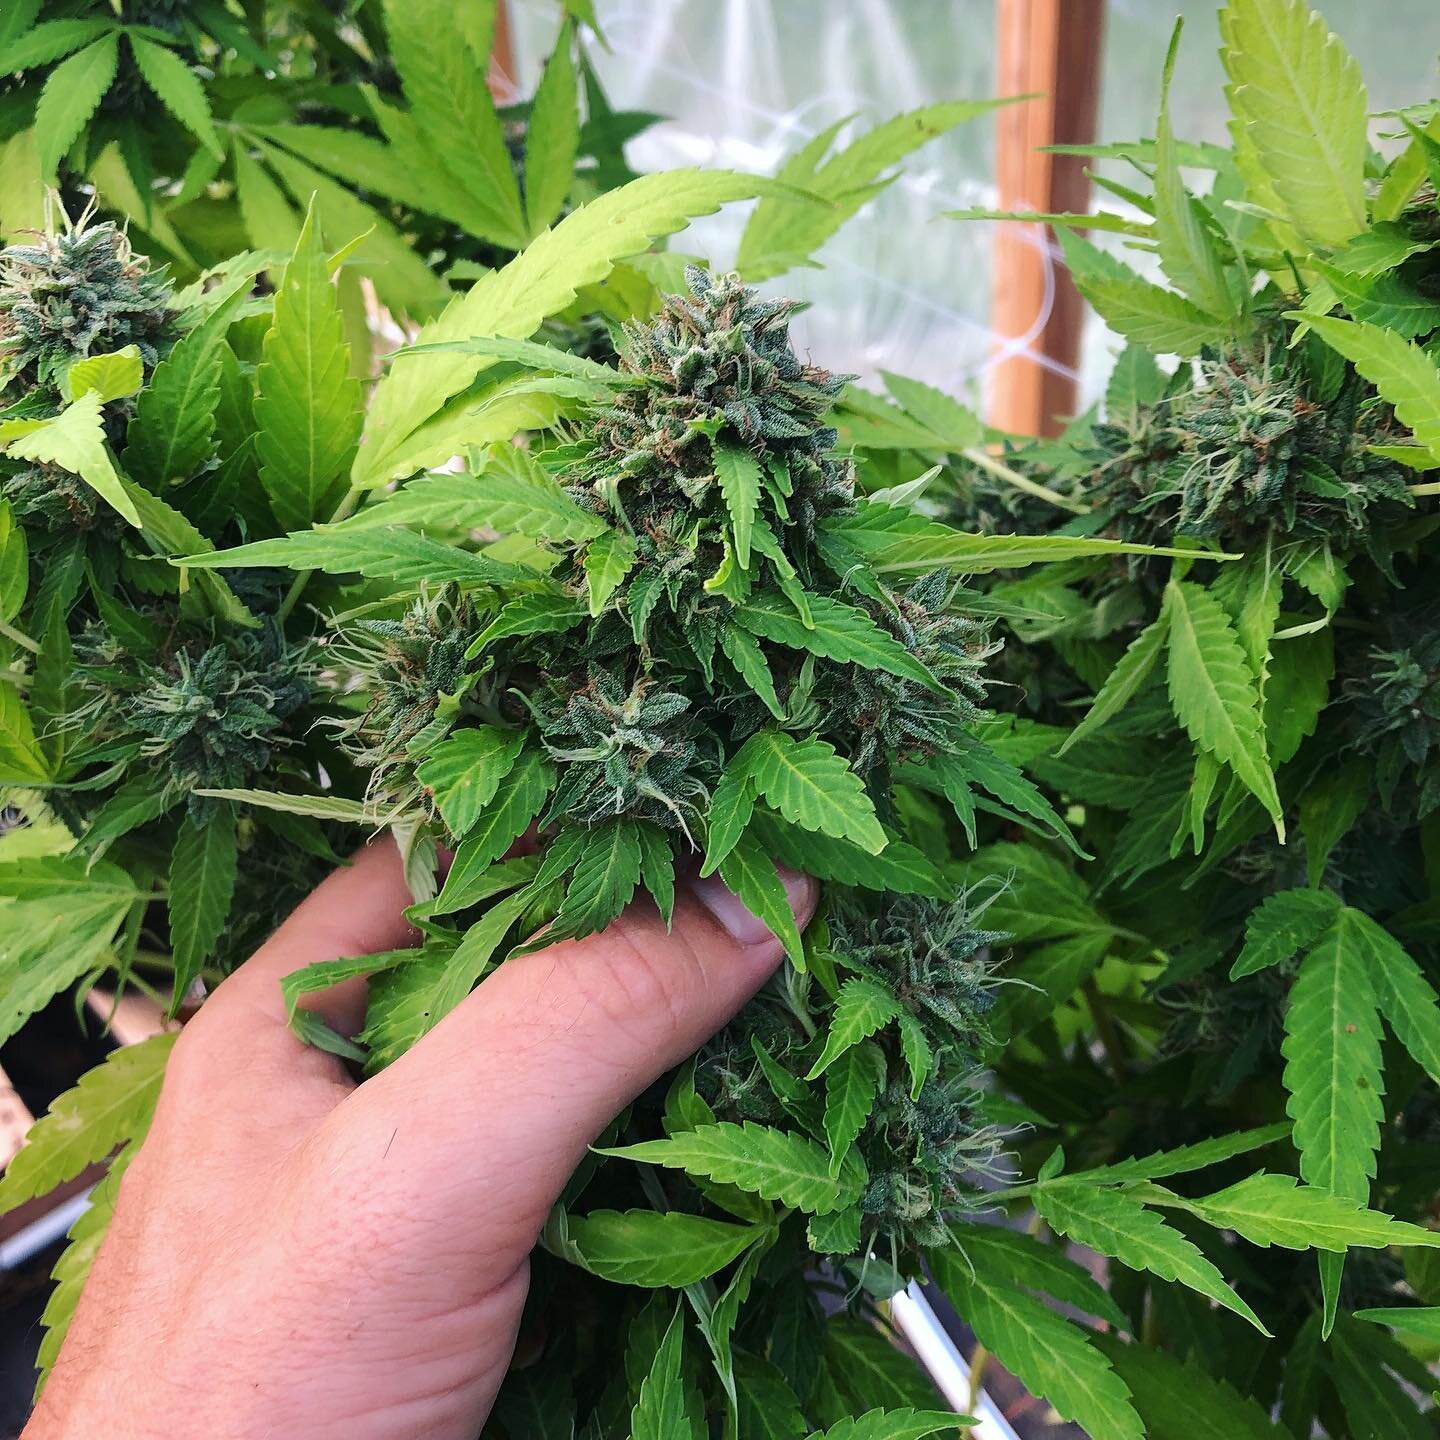 So pretty we almost don&rsquo;t want to cut it down!! Just kidding&hellip;we can&rsquo;t wait to try this crop 🥰😶&zwj;🌫️🌿 #hempheals
.
.
.
#cbd #cbdwellness #cbdbenefits #cbdhealth #cbdproducts #sleepaid #painreliever #painrelief #anxietyrelief #